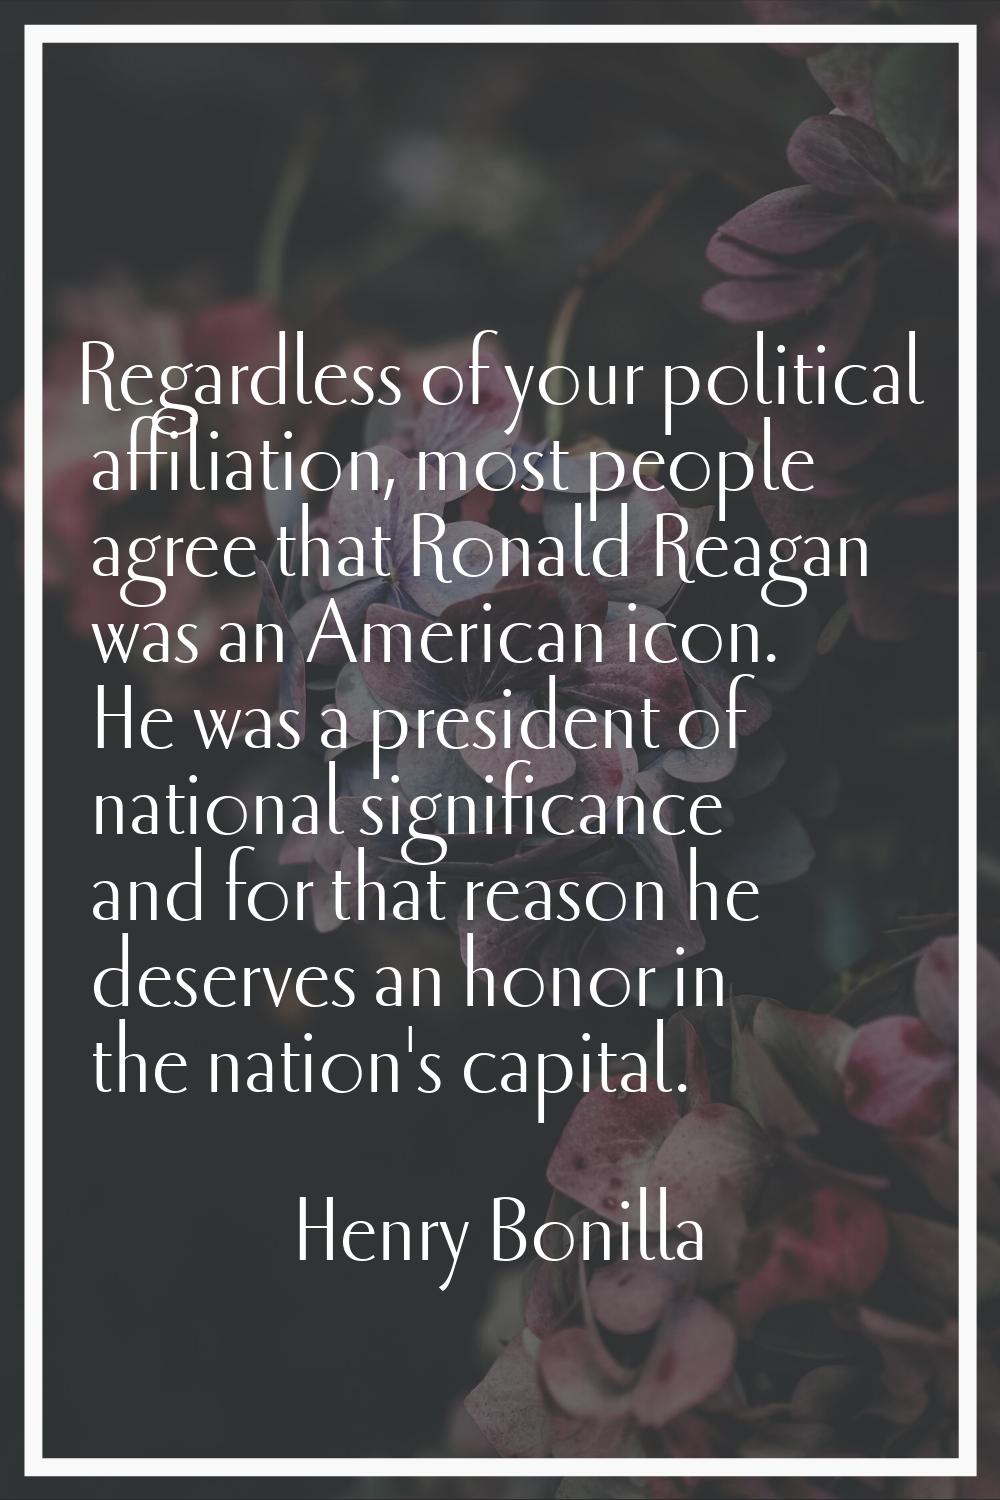 Regardless of your political affiliation, most people agree that Ronald Reagan was an American icon